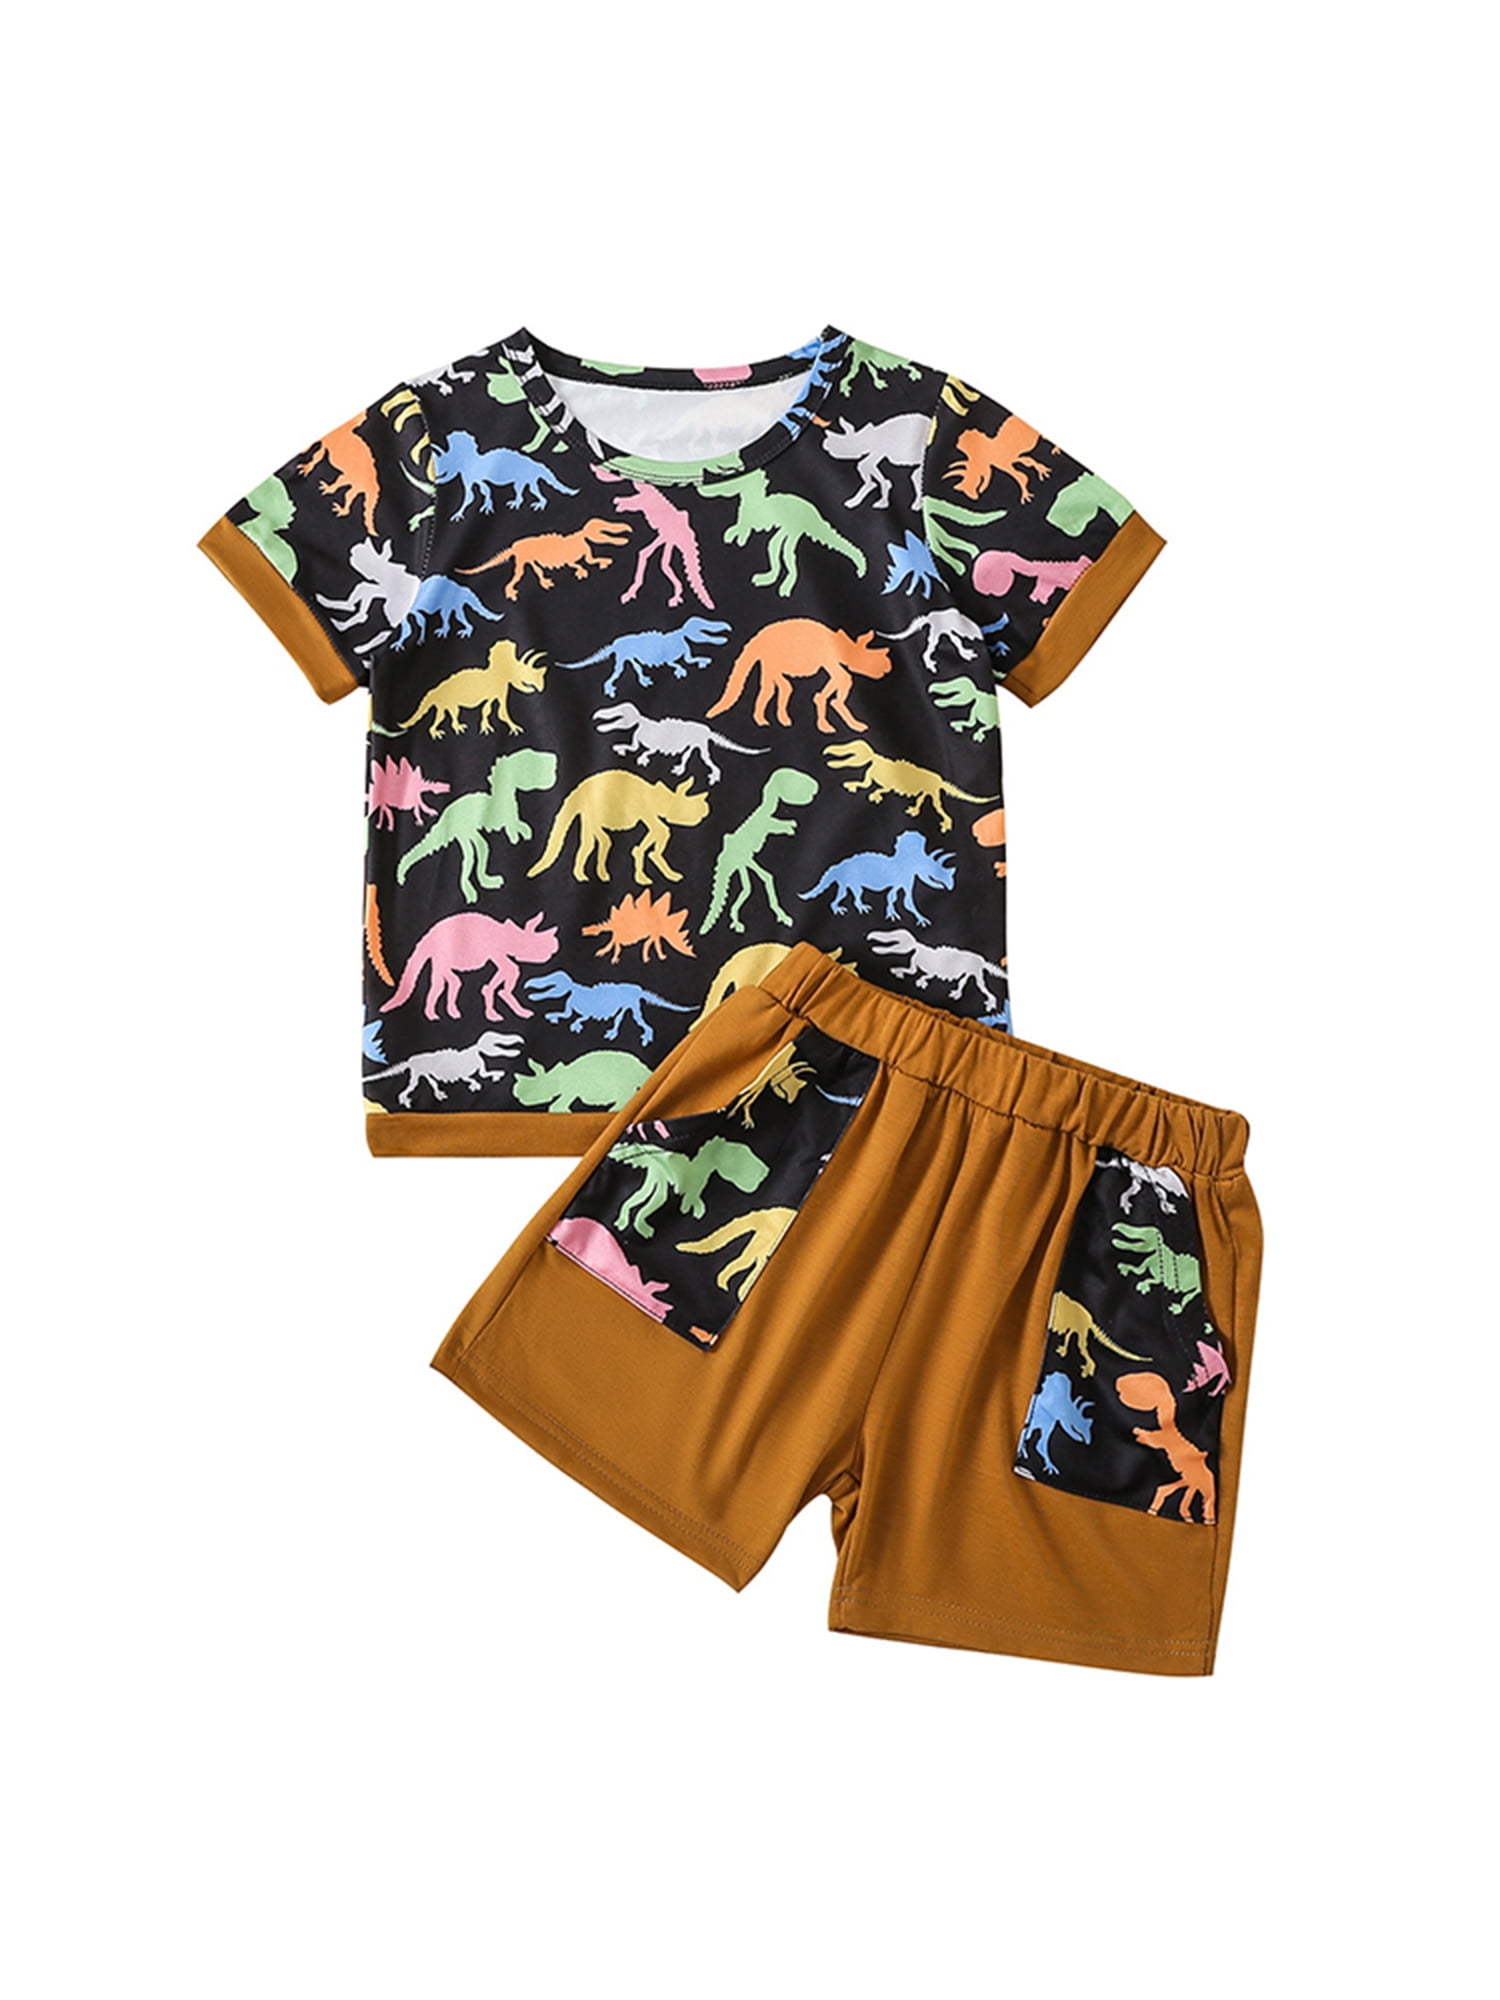 Toddler Kids Baby Boy Girl Tiger T-shirt Tee Tops Shorts Trousers Outfit Set 